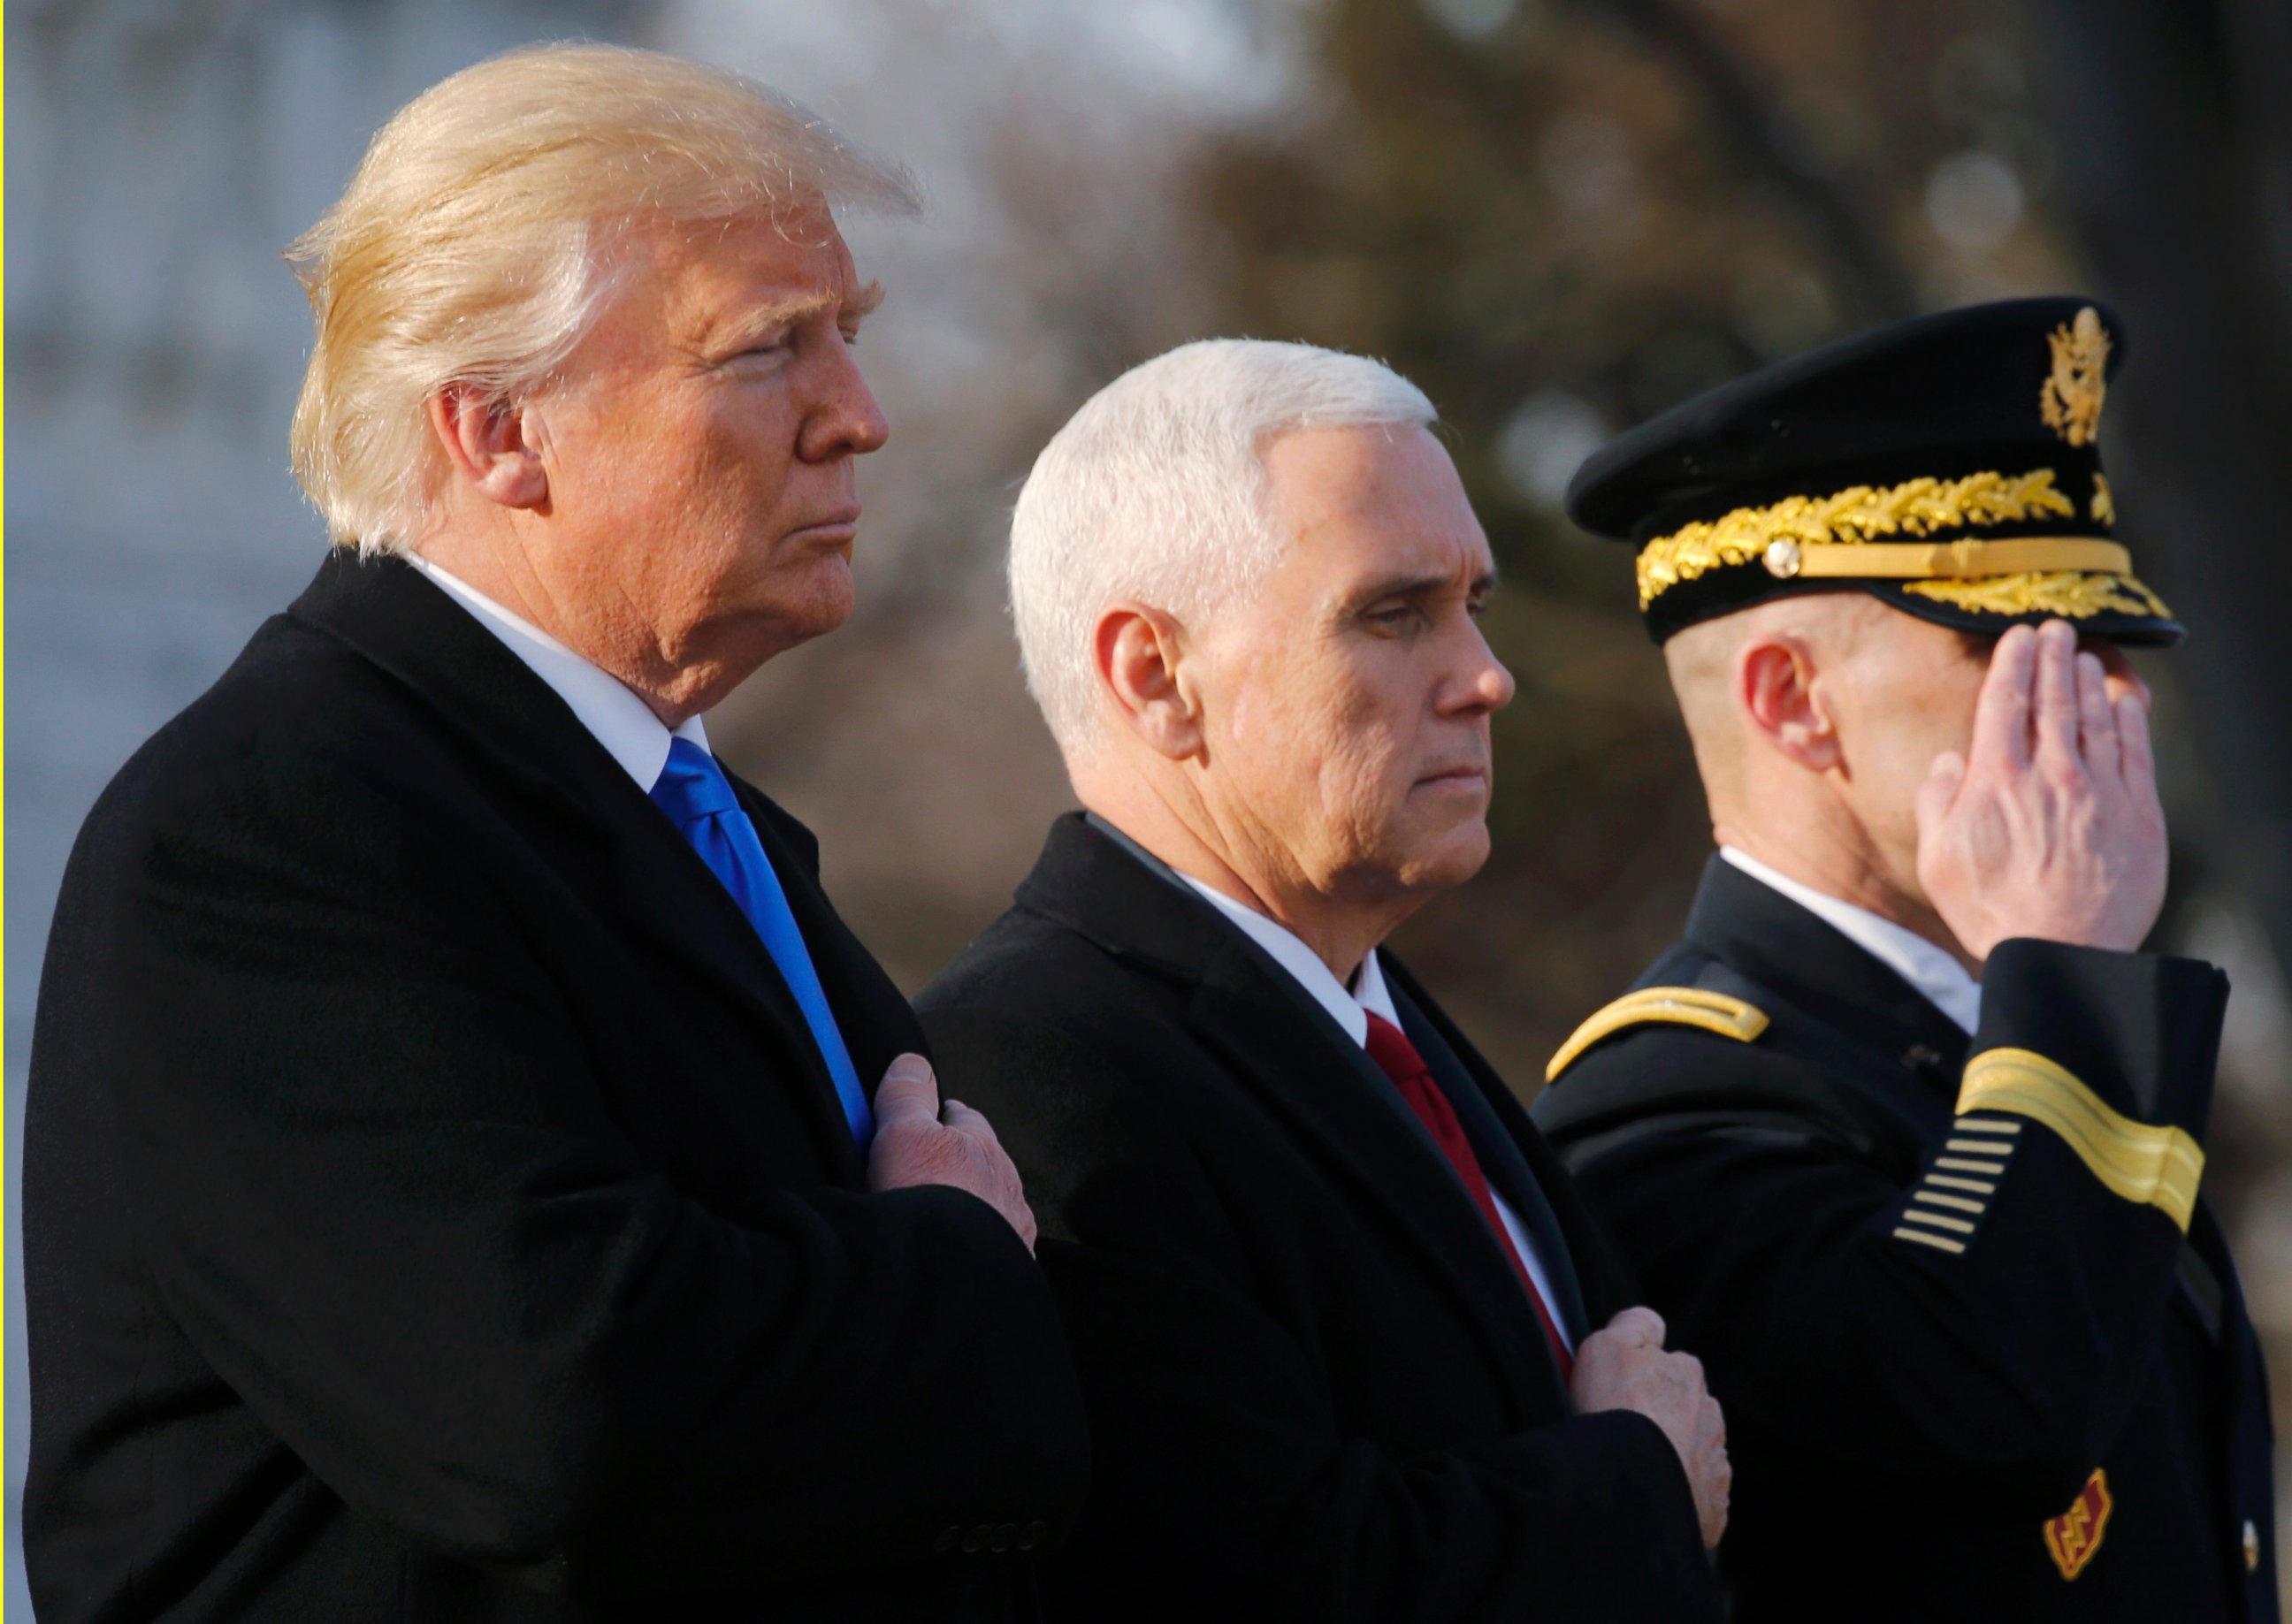 PHOTO: President-elect Donald Trump and Vice President-elect Mike Pence participate in a wreath laying ceremony at Arlington National Cemetery, Jan. 19, 2017.